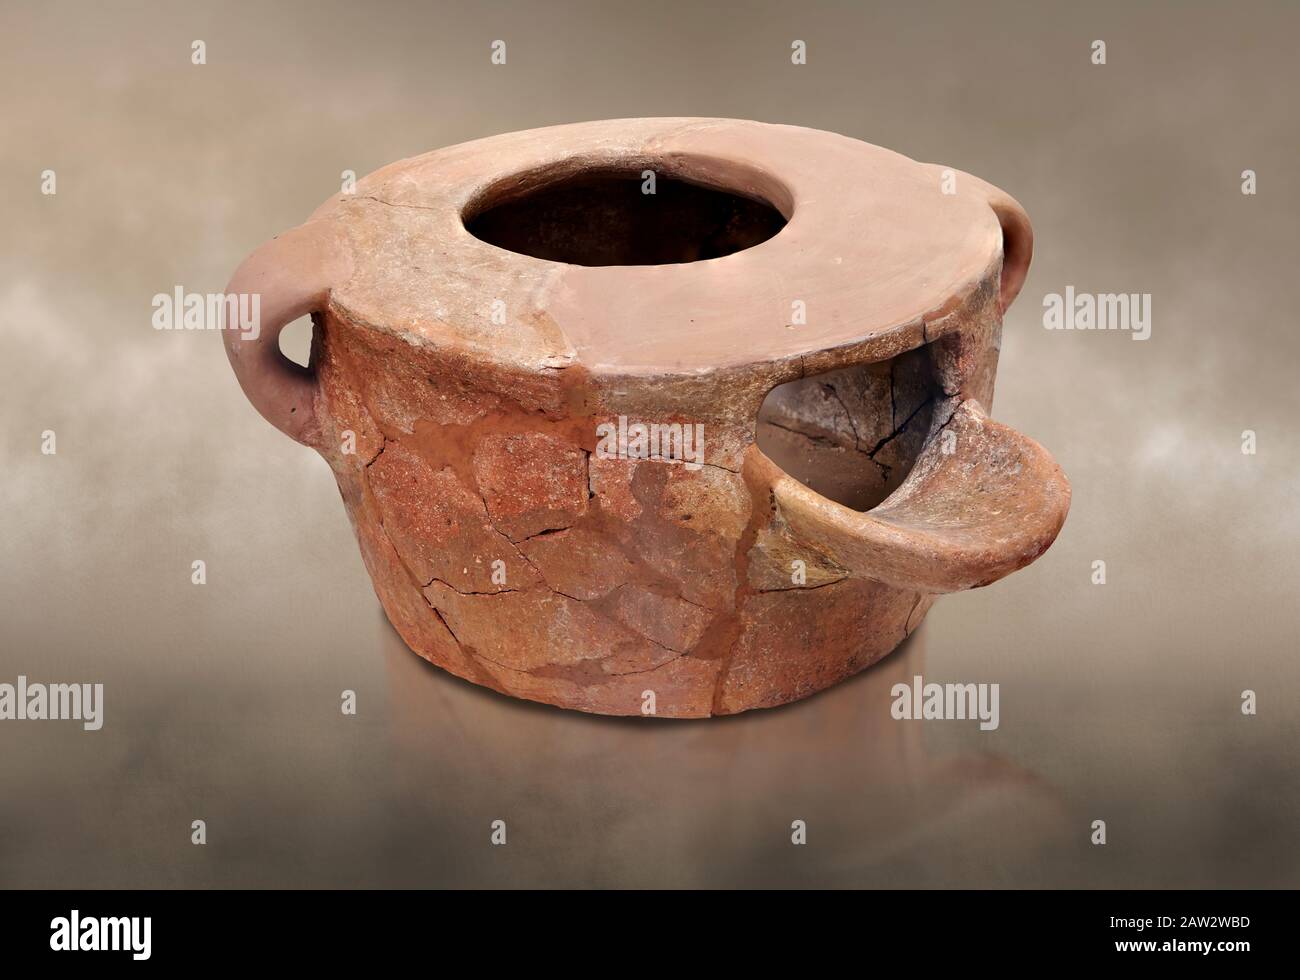 Neolithic Cretian portable clay oven open kiln fired at Knossos,  4500-3000 BC, Heraklion Archaeological  Museum. Stock Photo